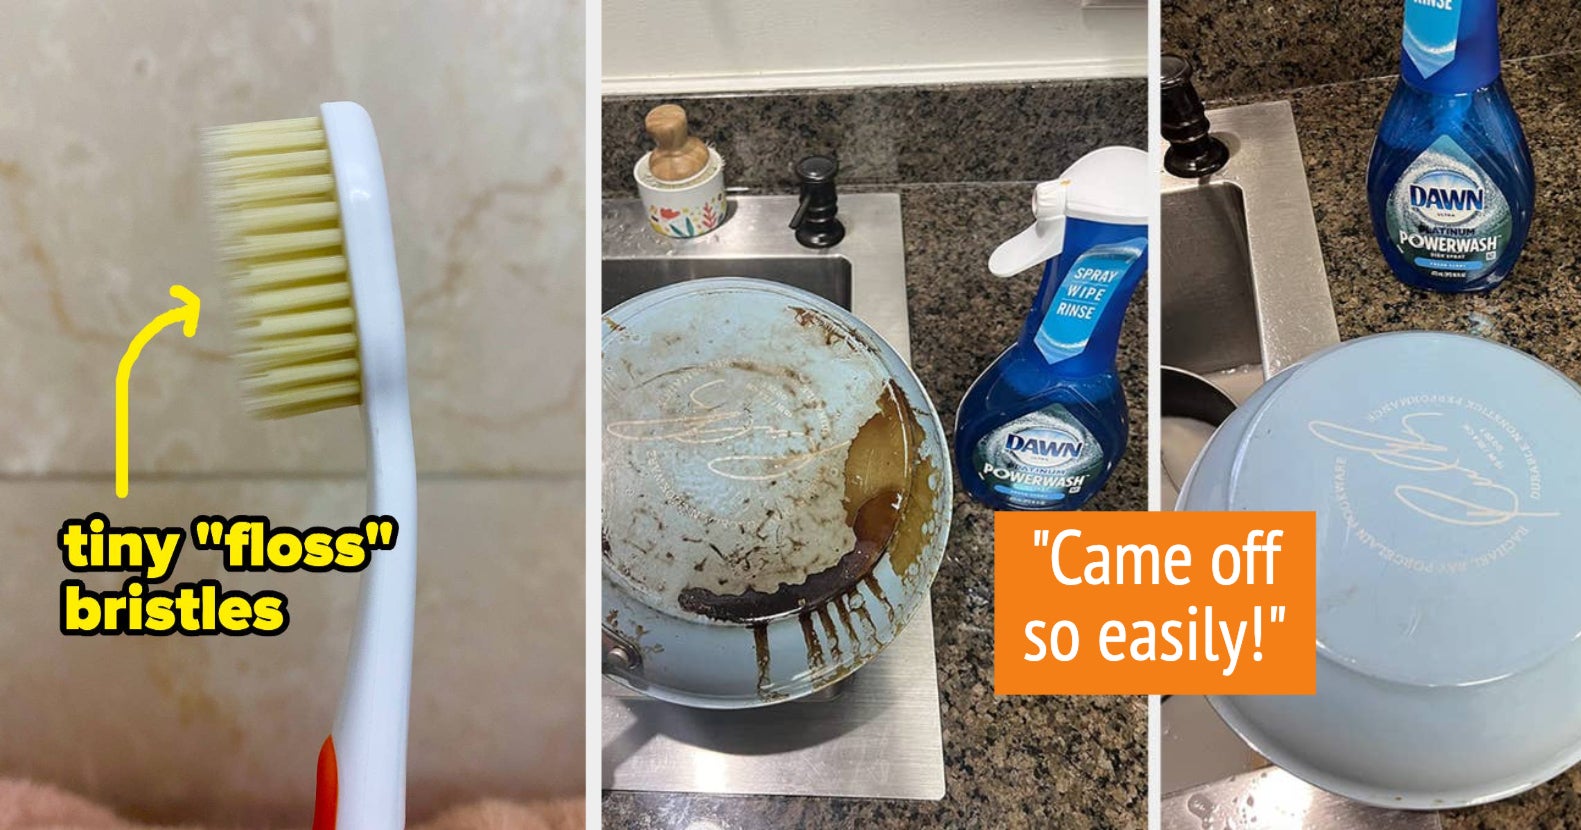 36 Products That'll Help Make Everyday Tasks Easier